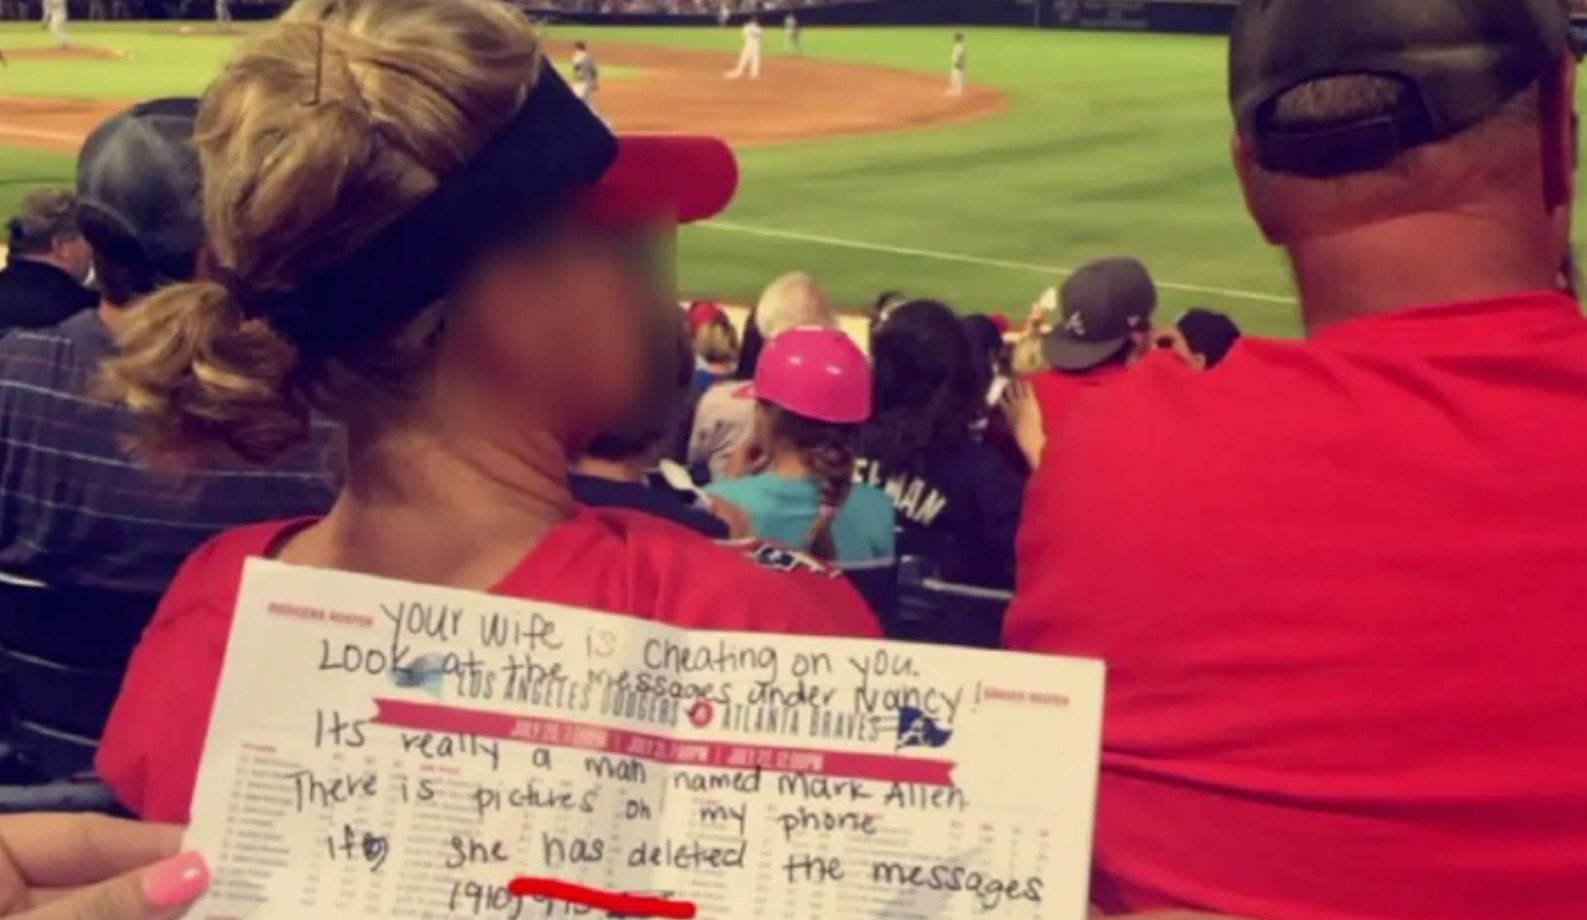 Cheating Wife Reportedly Busted While Sexting At A Baseball Game HuffPost Sports image